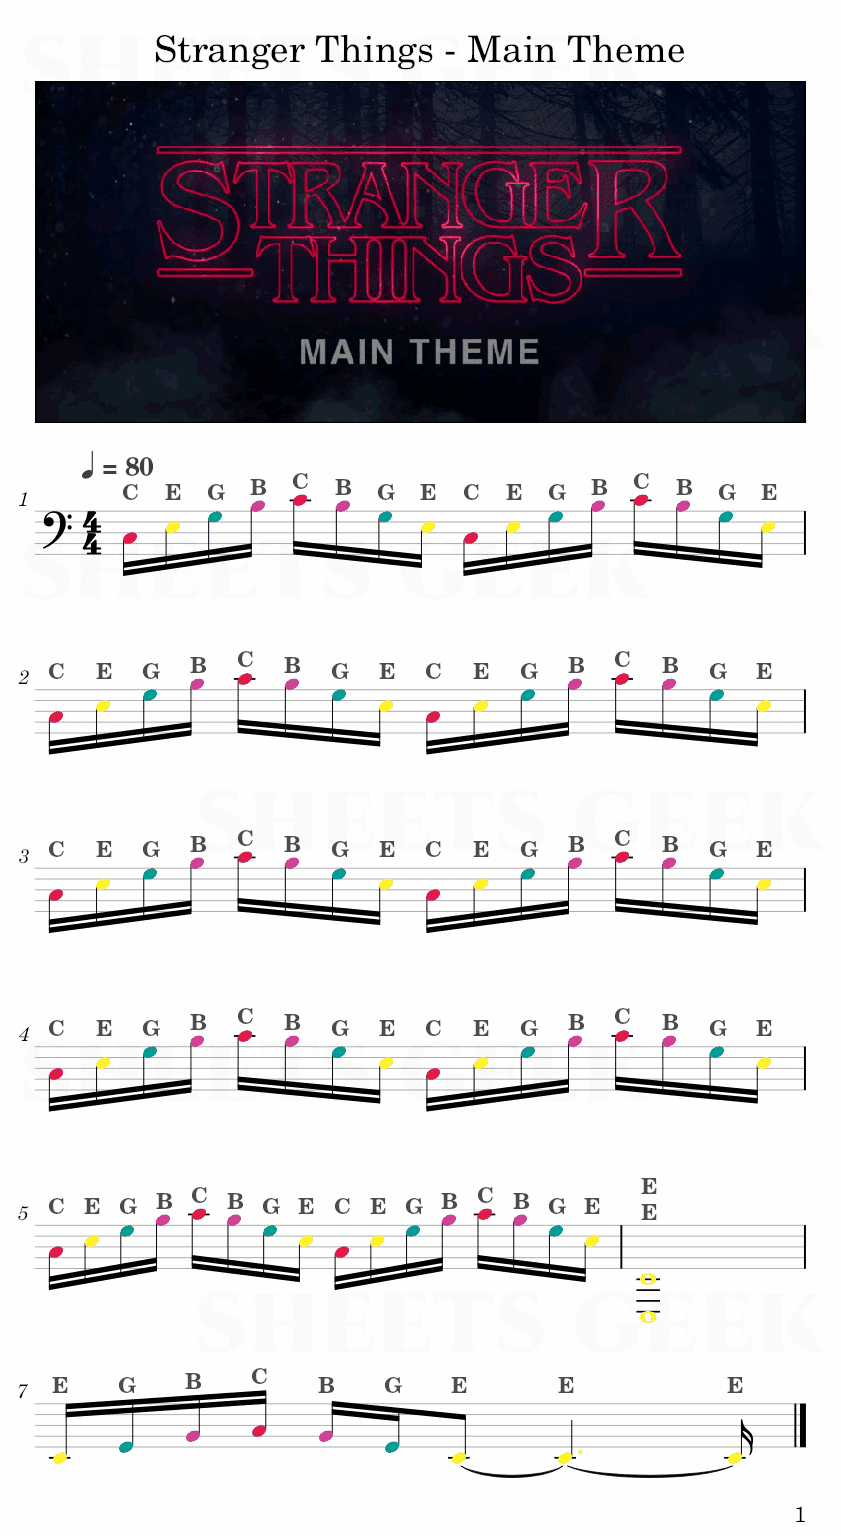 Stranger Things - Main Theme Easy Sheet Music Free for piano, keyboard, flute, violin, sax, cello page 1